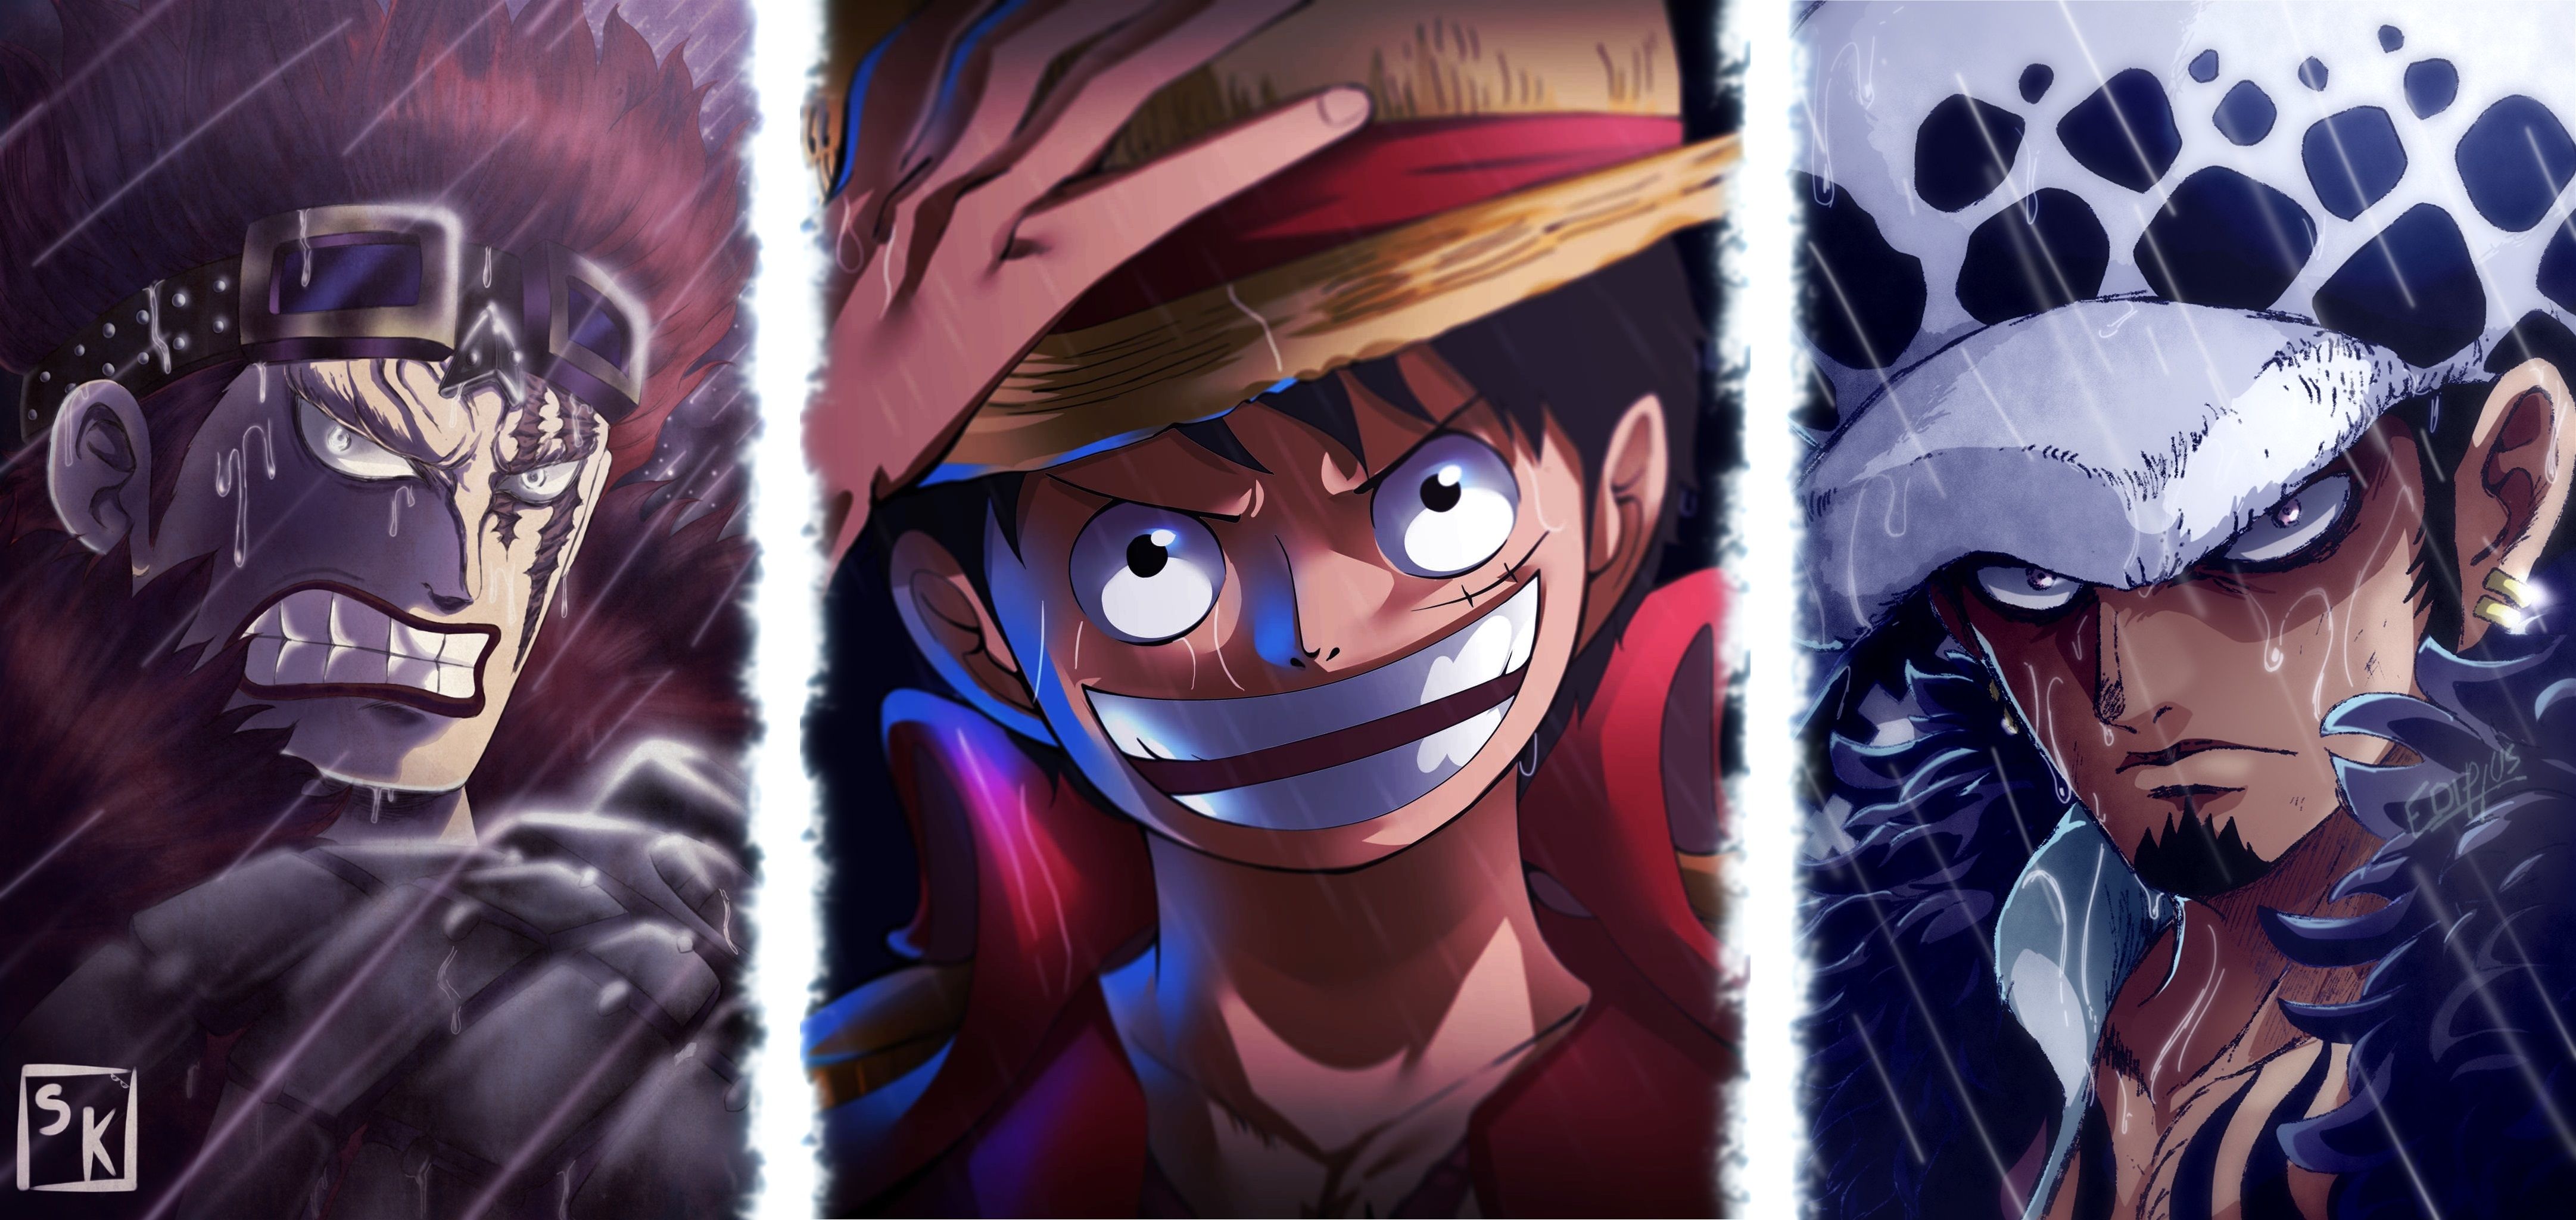 One Piece Team Art Wallpaper, HD Anime 4K Wallpaper, Image, Photo and Background